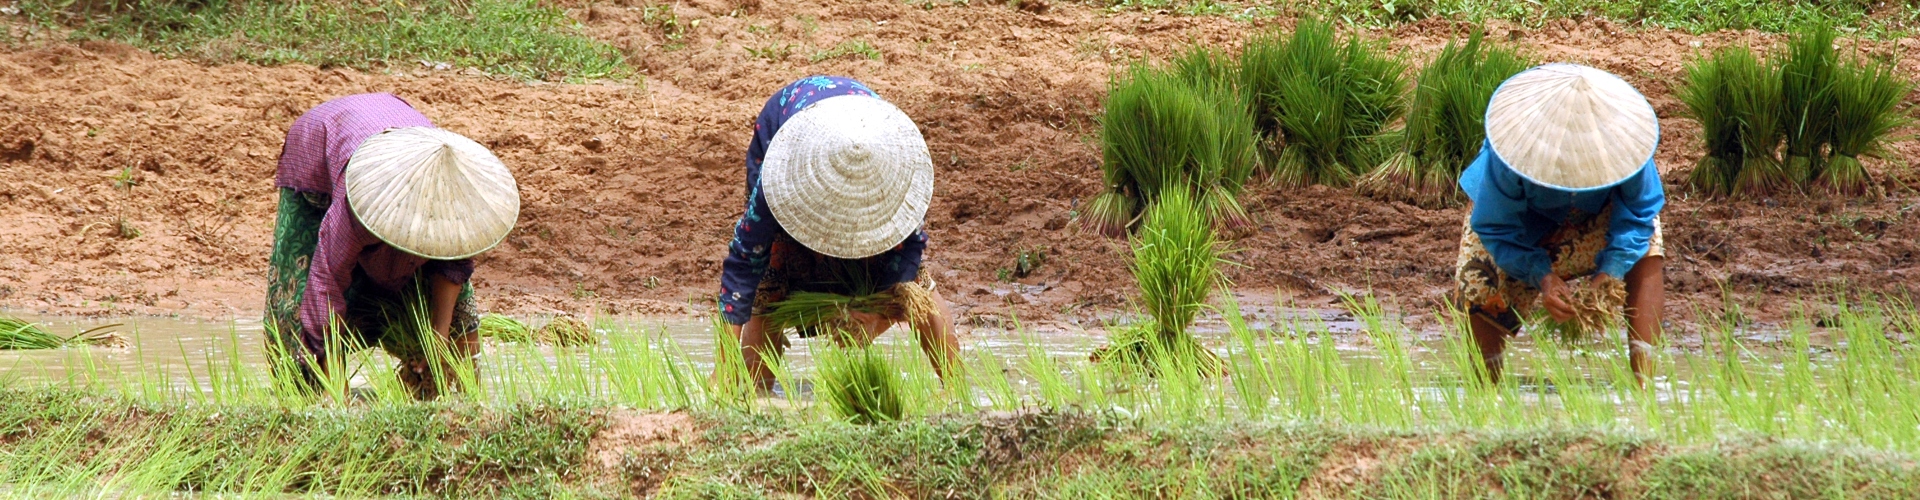 Three women working in a rice field with hats on in Cambodia